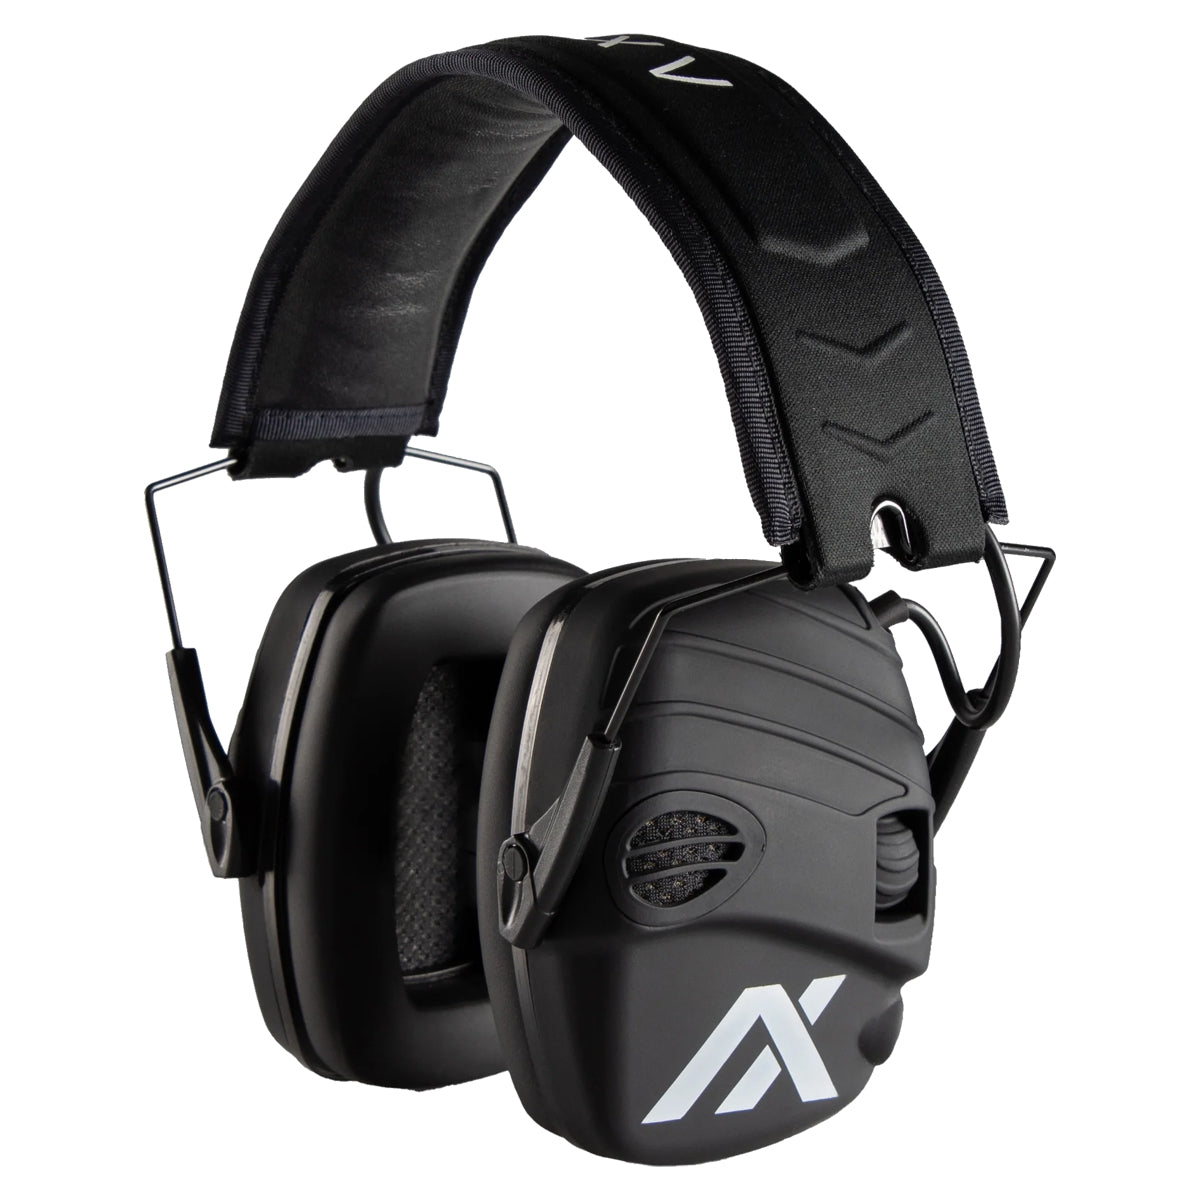 Axil Trackr Electronic Ear Muffs